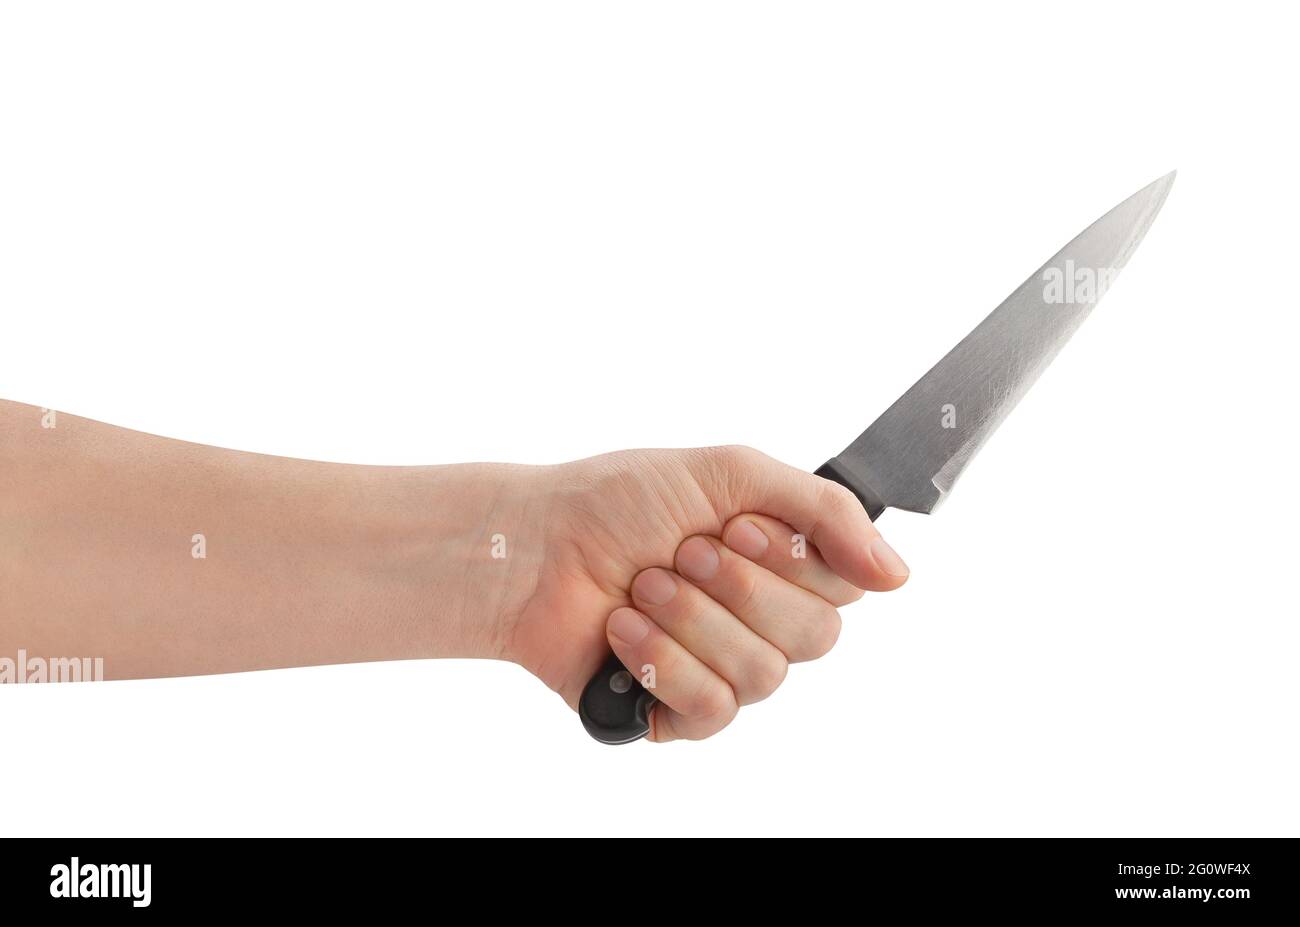 kitchen knife in hand path isolated on white Stock Photo